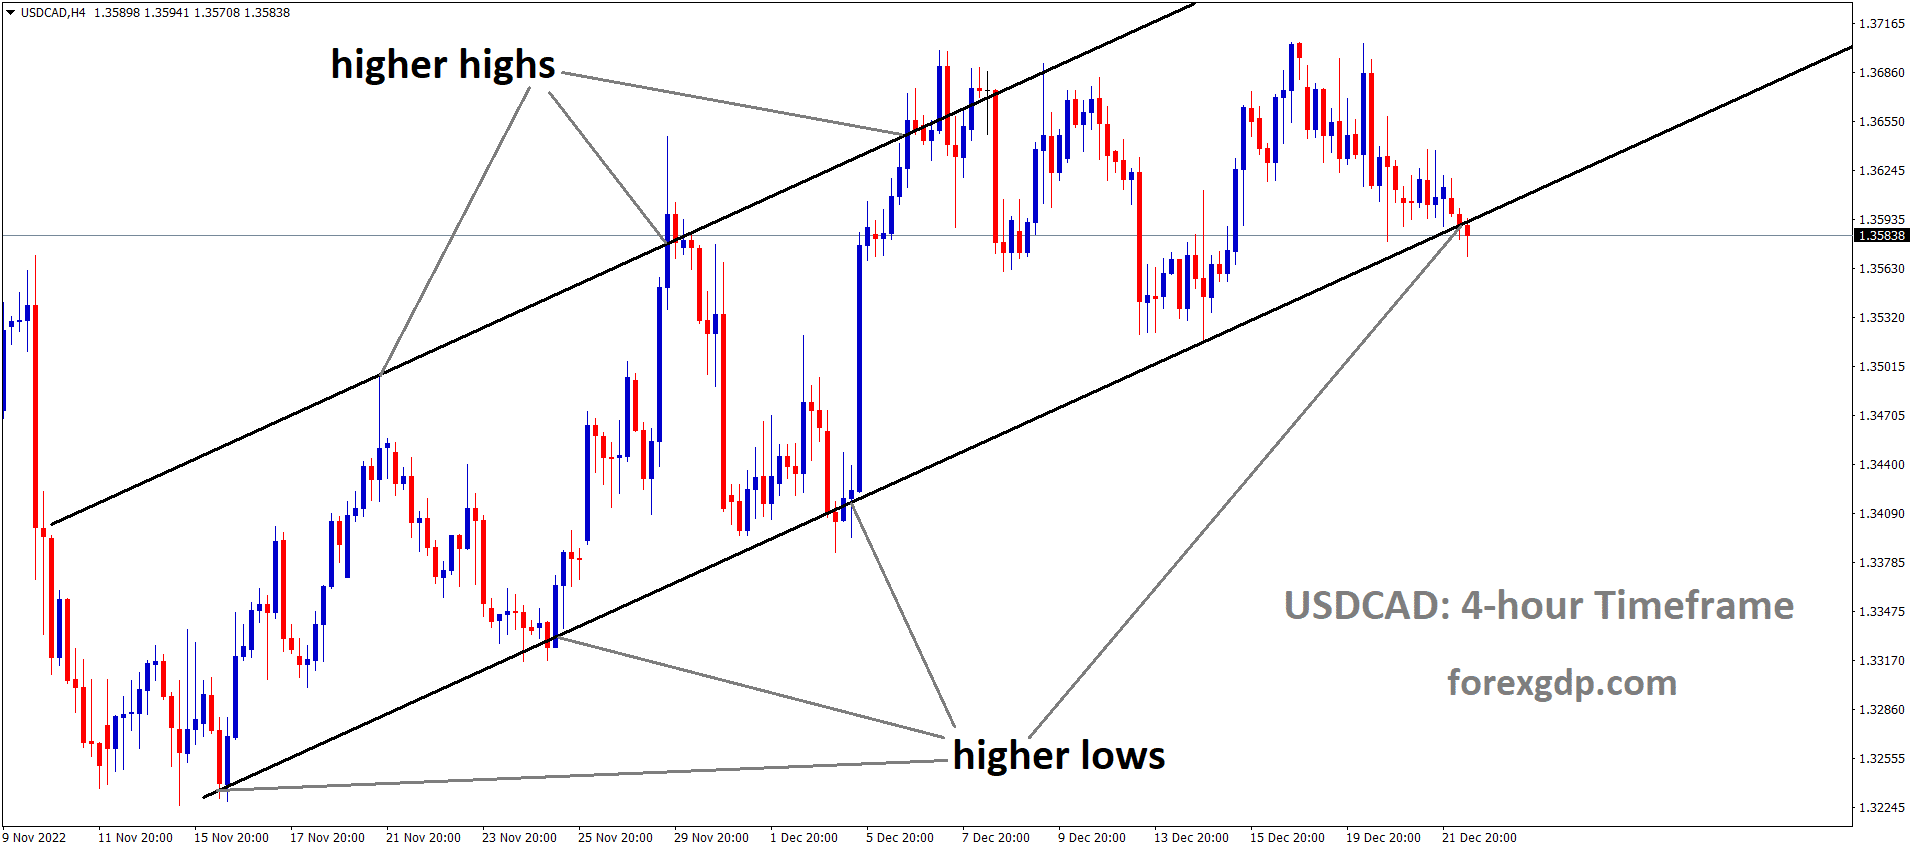 USDCAD is moving in an Ascending channel and the market has reached the higher low area of the channel